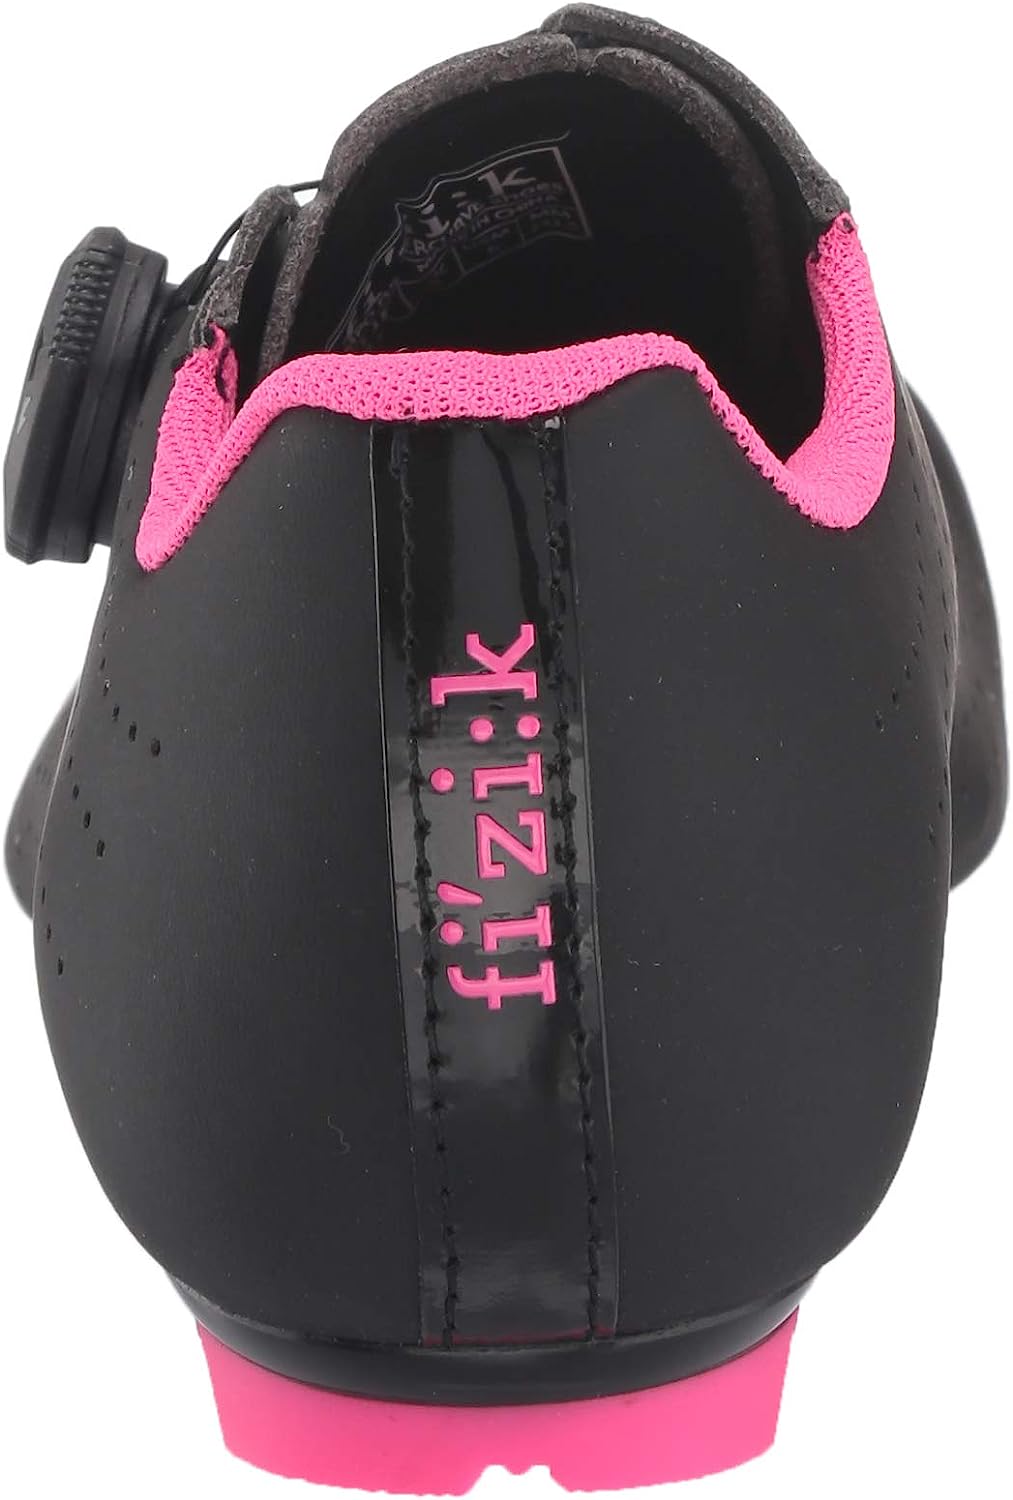 Fizik R5 Road Cycling Shoe Carbon Reinforced Microtex Fine Tune Fit Eur 45 US11 1/2